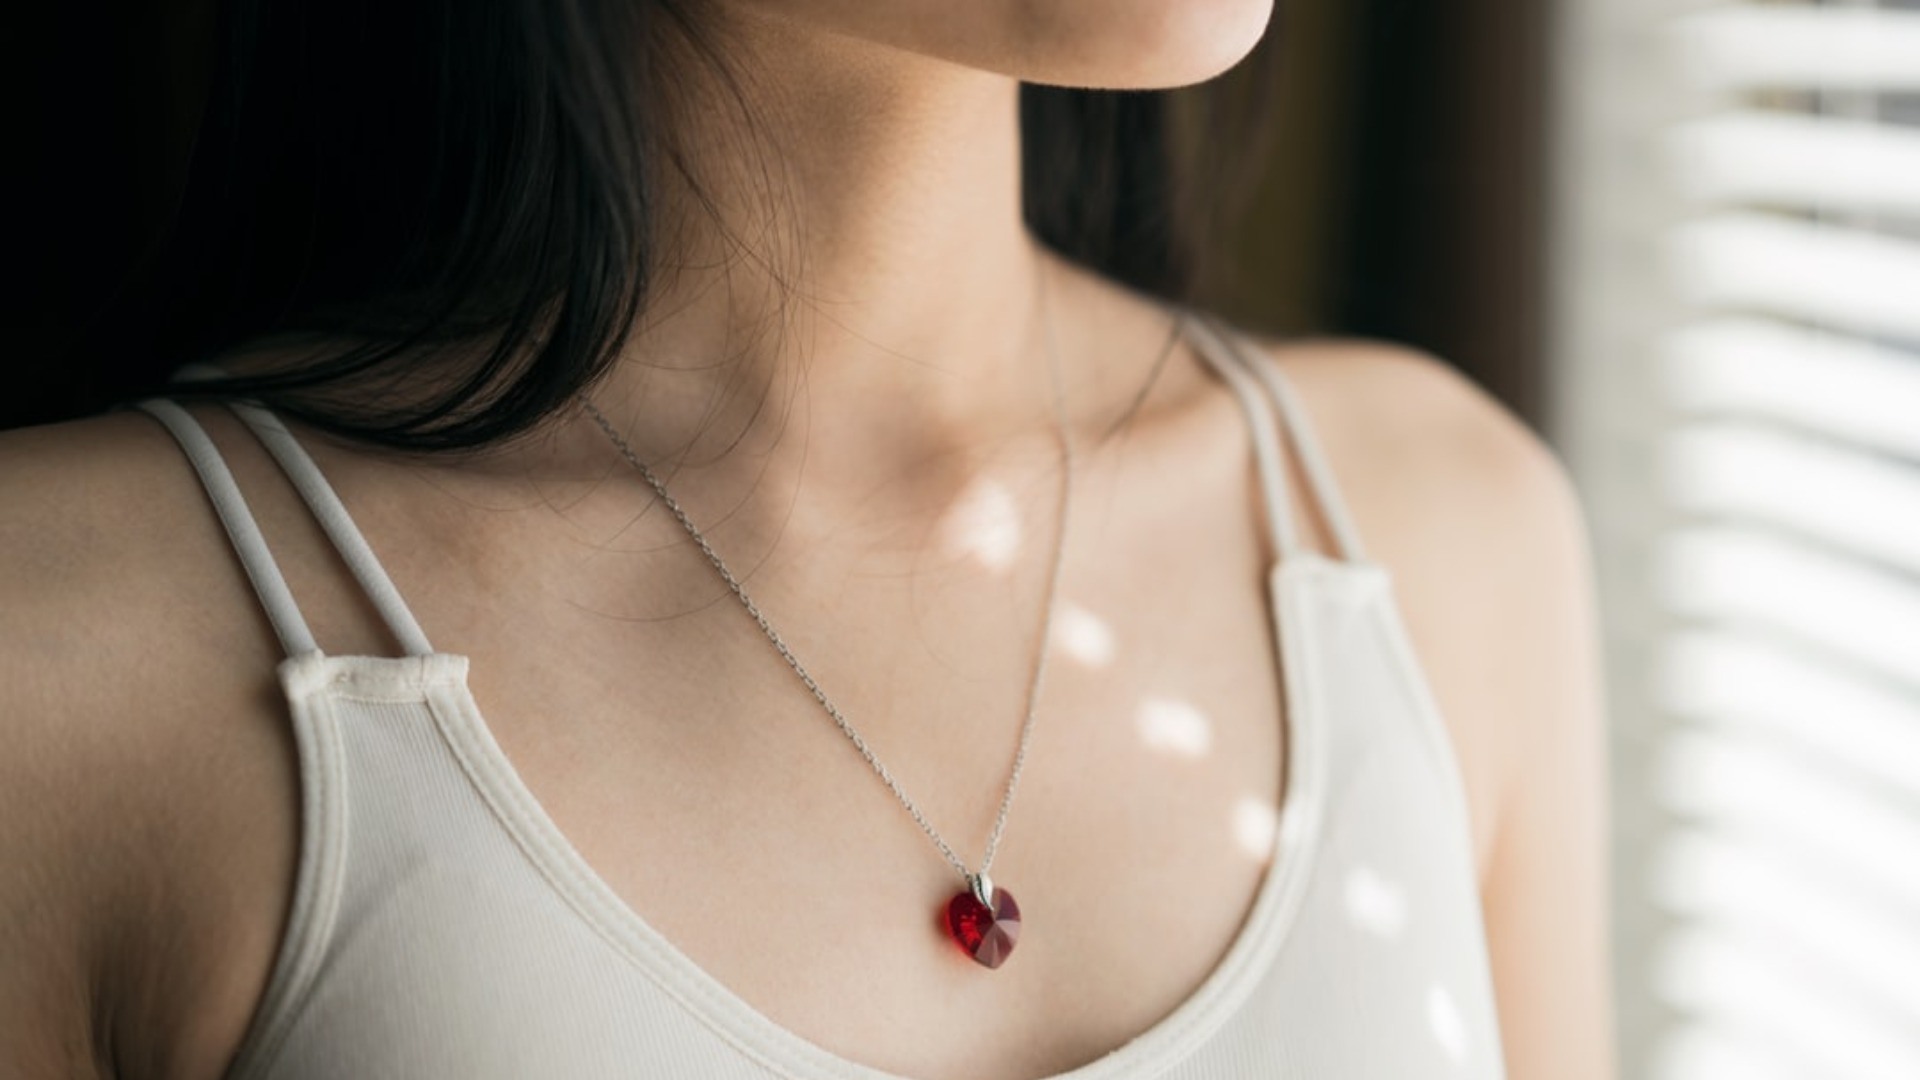 Finding the Best Heart Necklace for Her